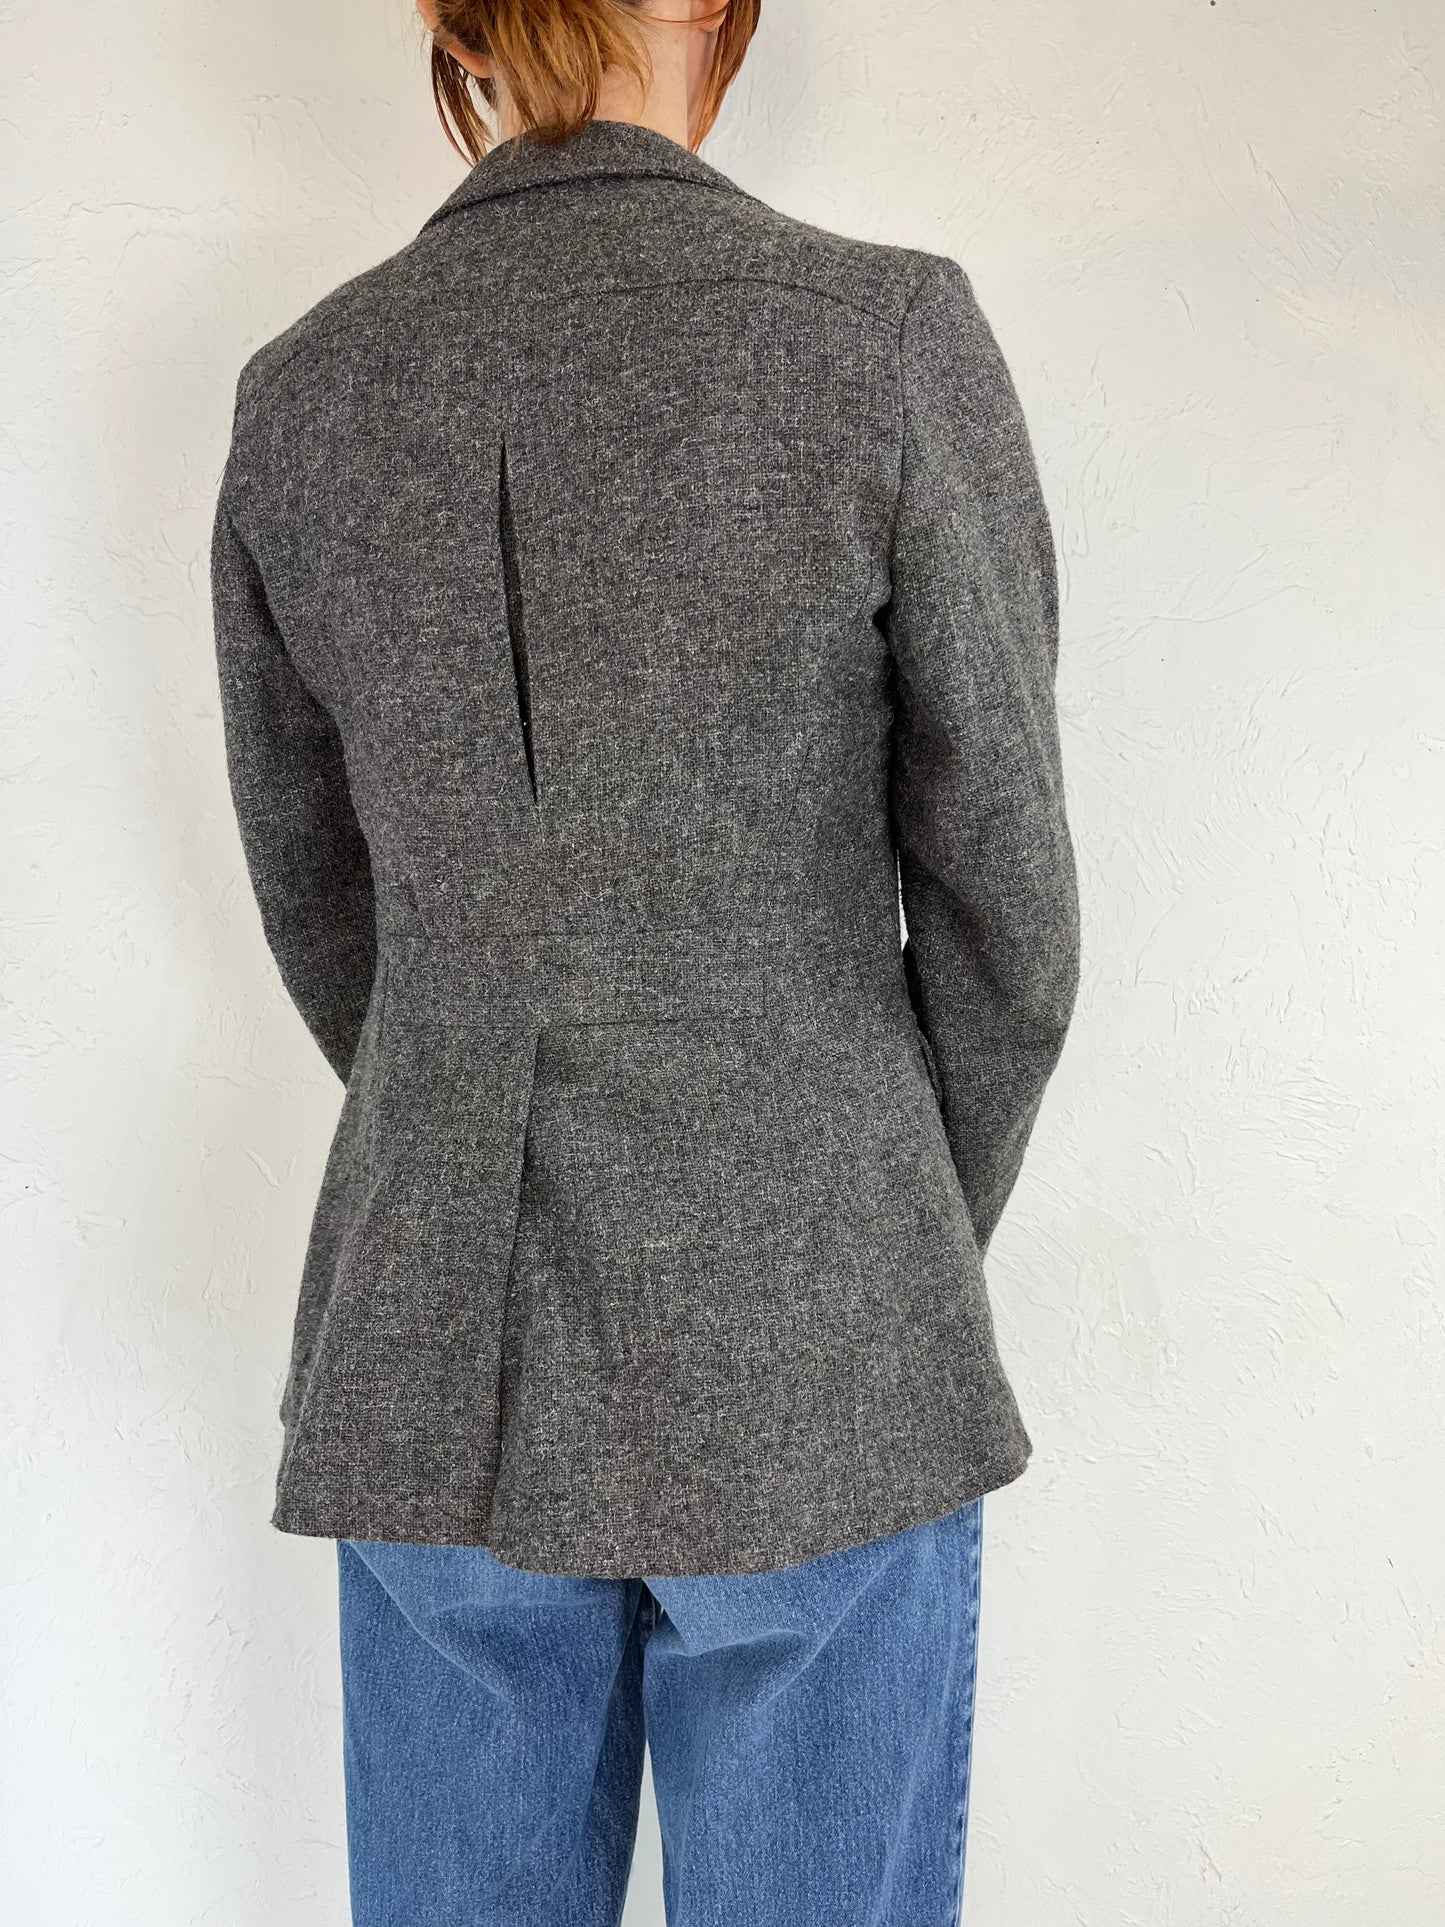 90s 'Rickis' Gray Wool Fitted Blazer Jacket / Small